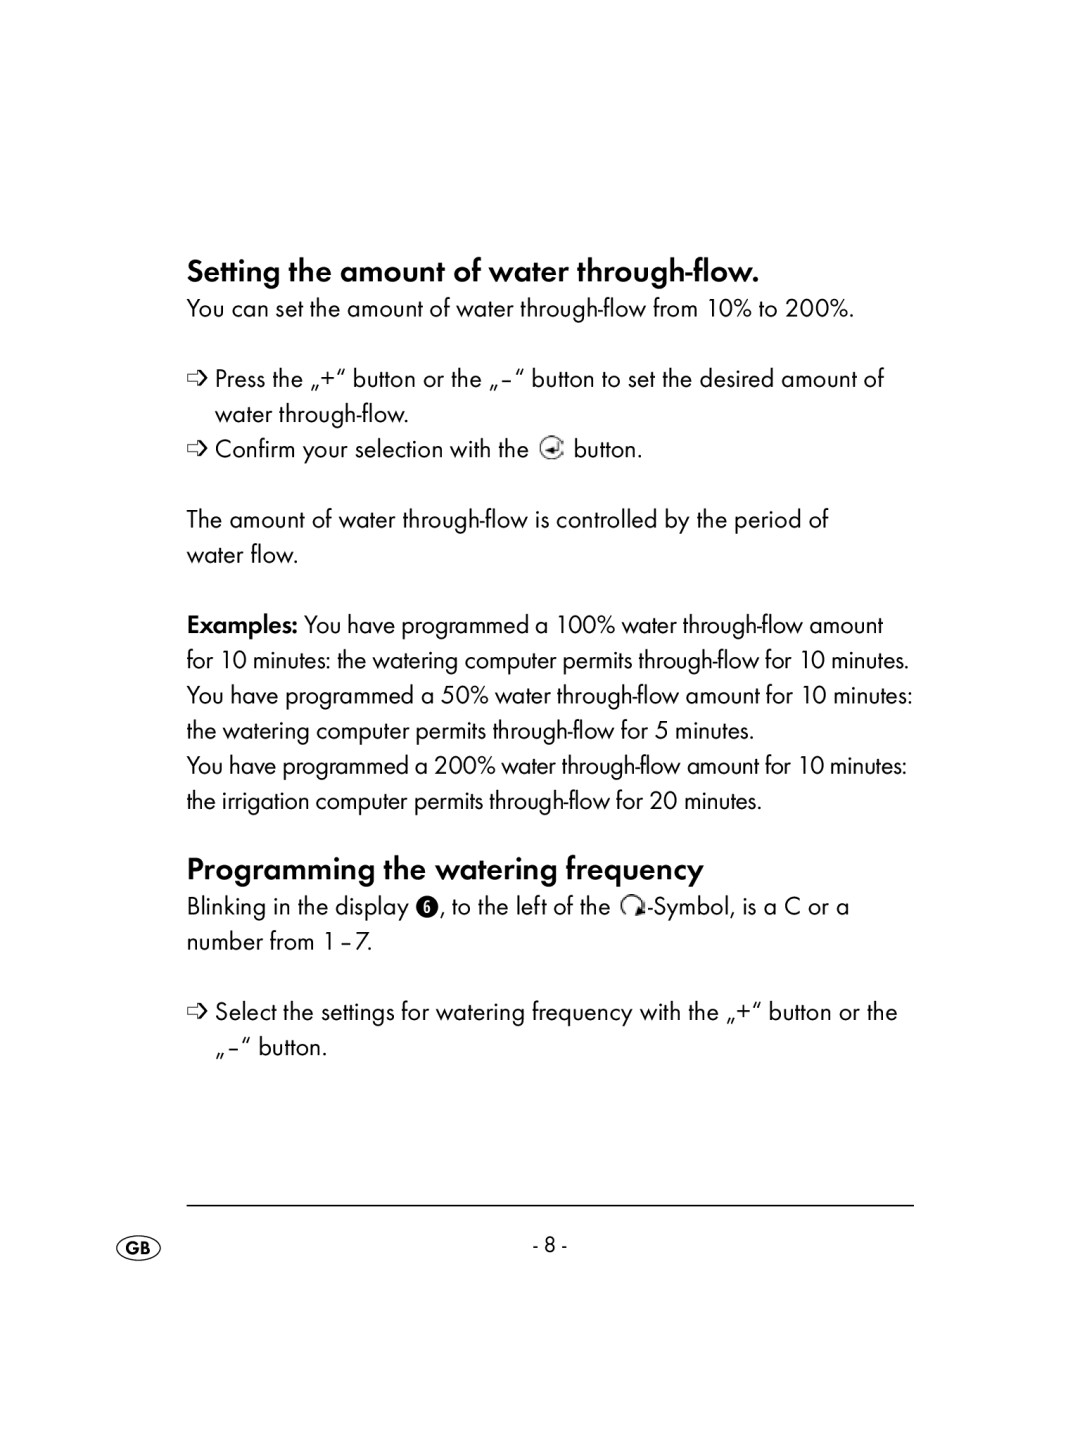 Kompernass KH 4083 manual Setting the amount of water through-flow, Programming the watering frequency 